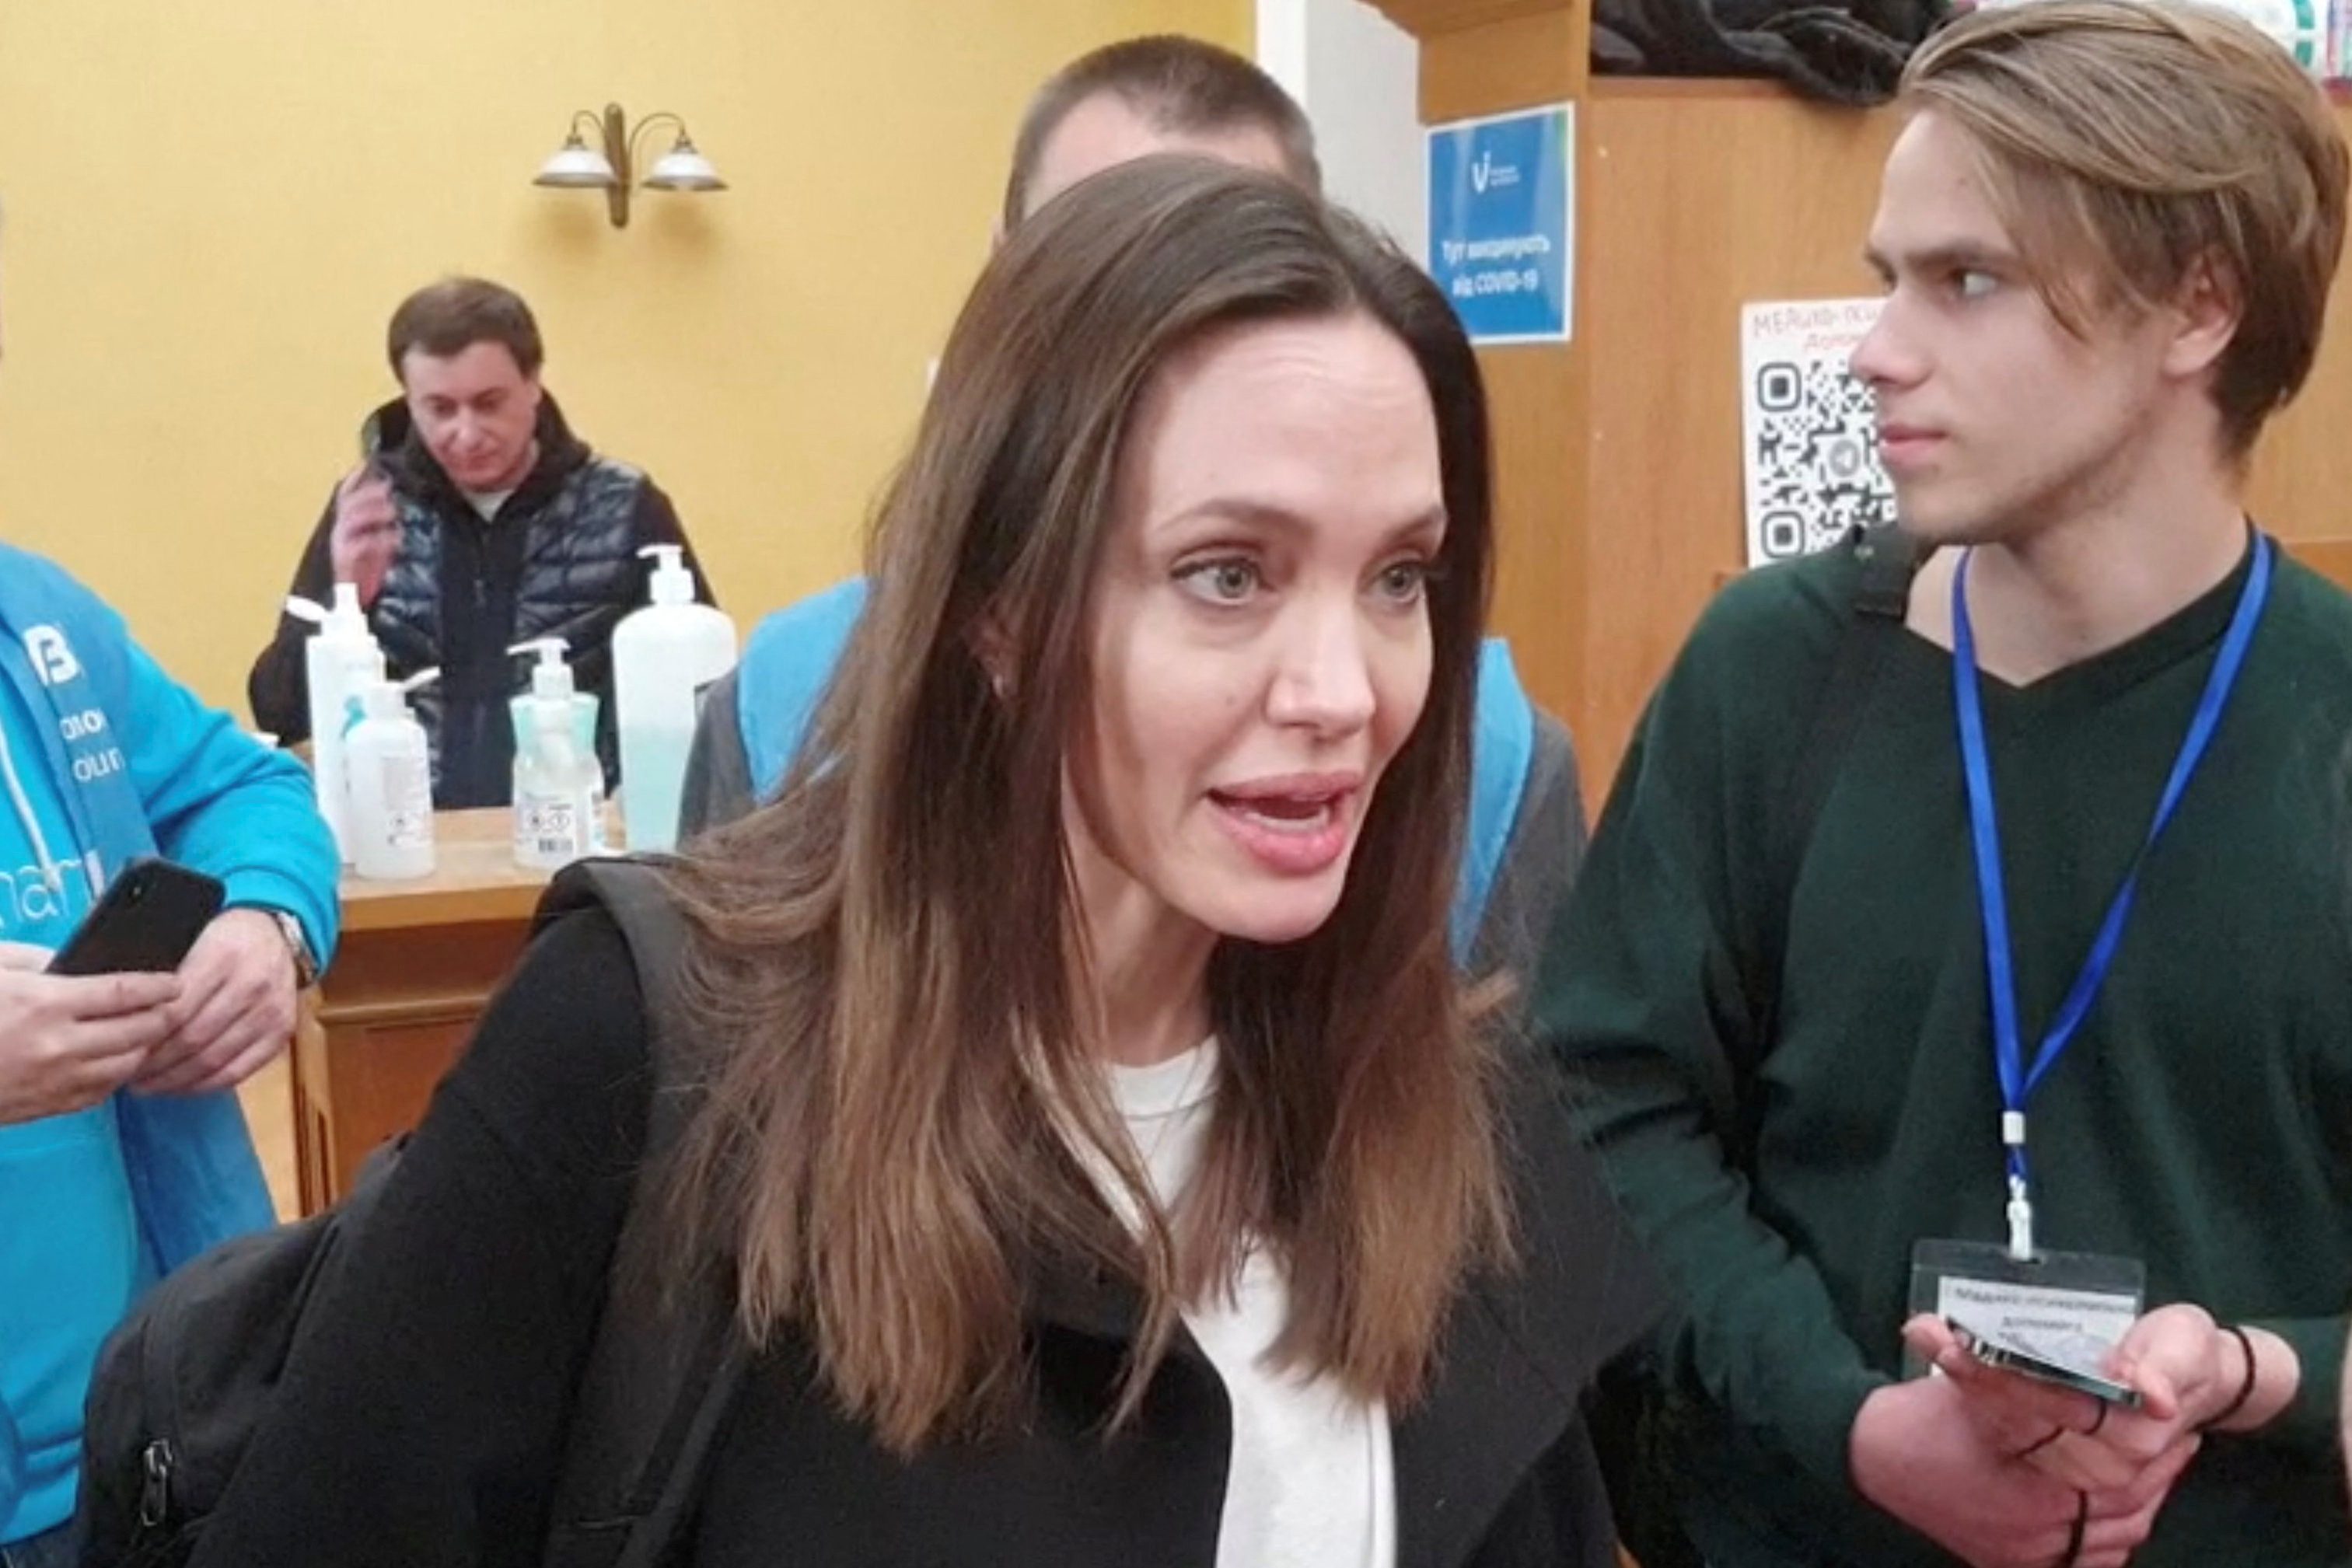 Angelina Jolie has been a UN Special Envoy for over 10 years, specializing in forced displacement Photo: Ukrzaliznytsia/Handout via REUTERS